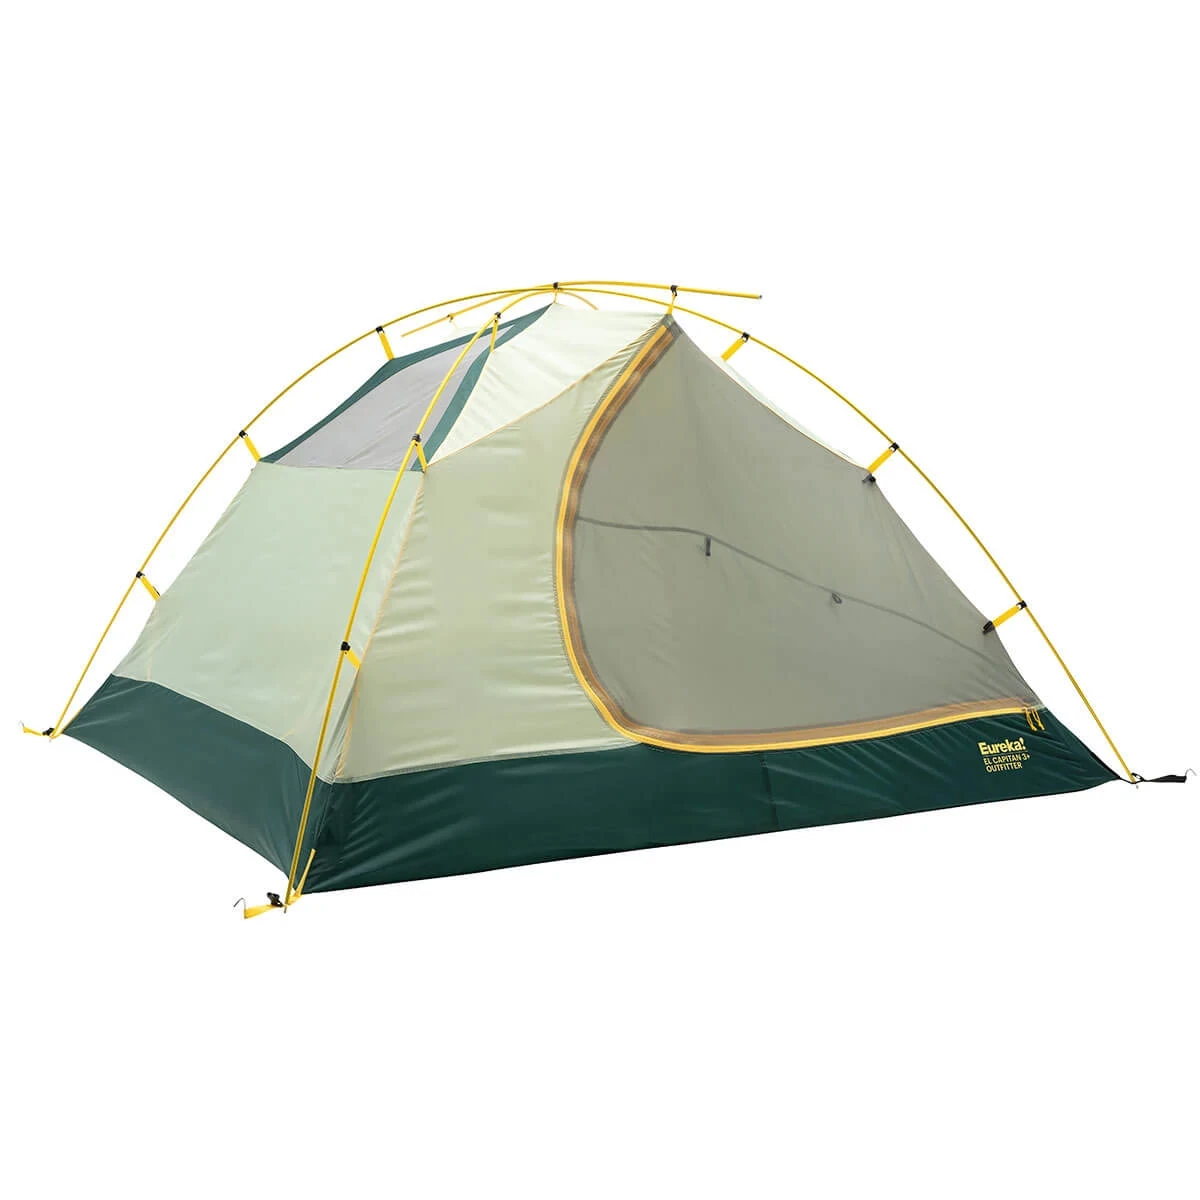 Eureka! El Capitan 3+ Outfitter tent without rainfly